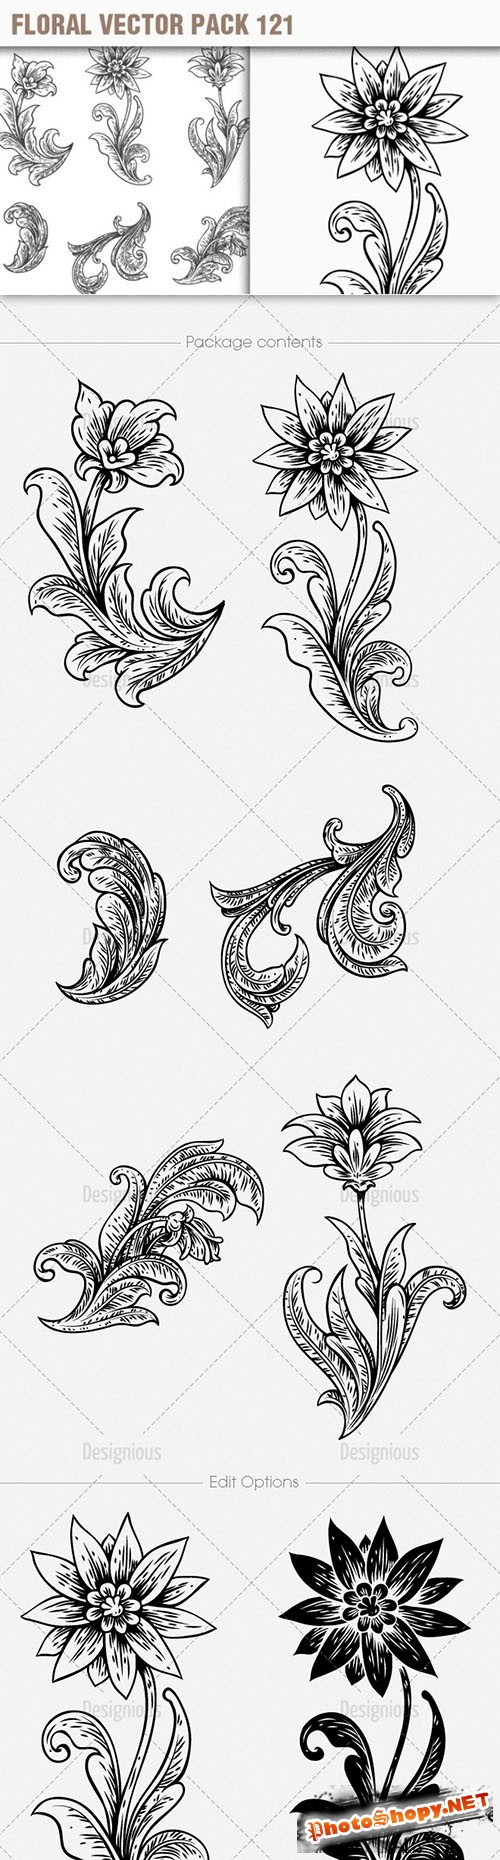 Floral Vector Pack 121